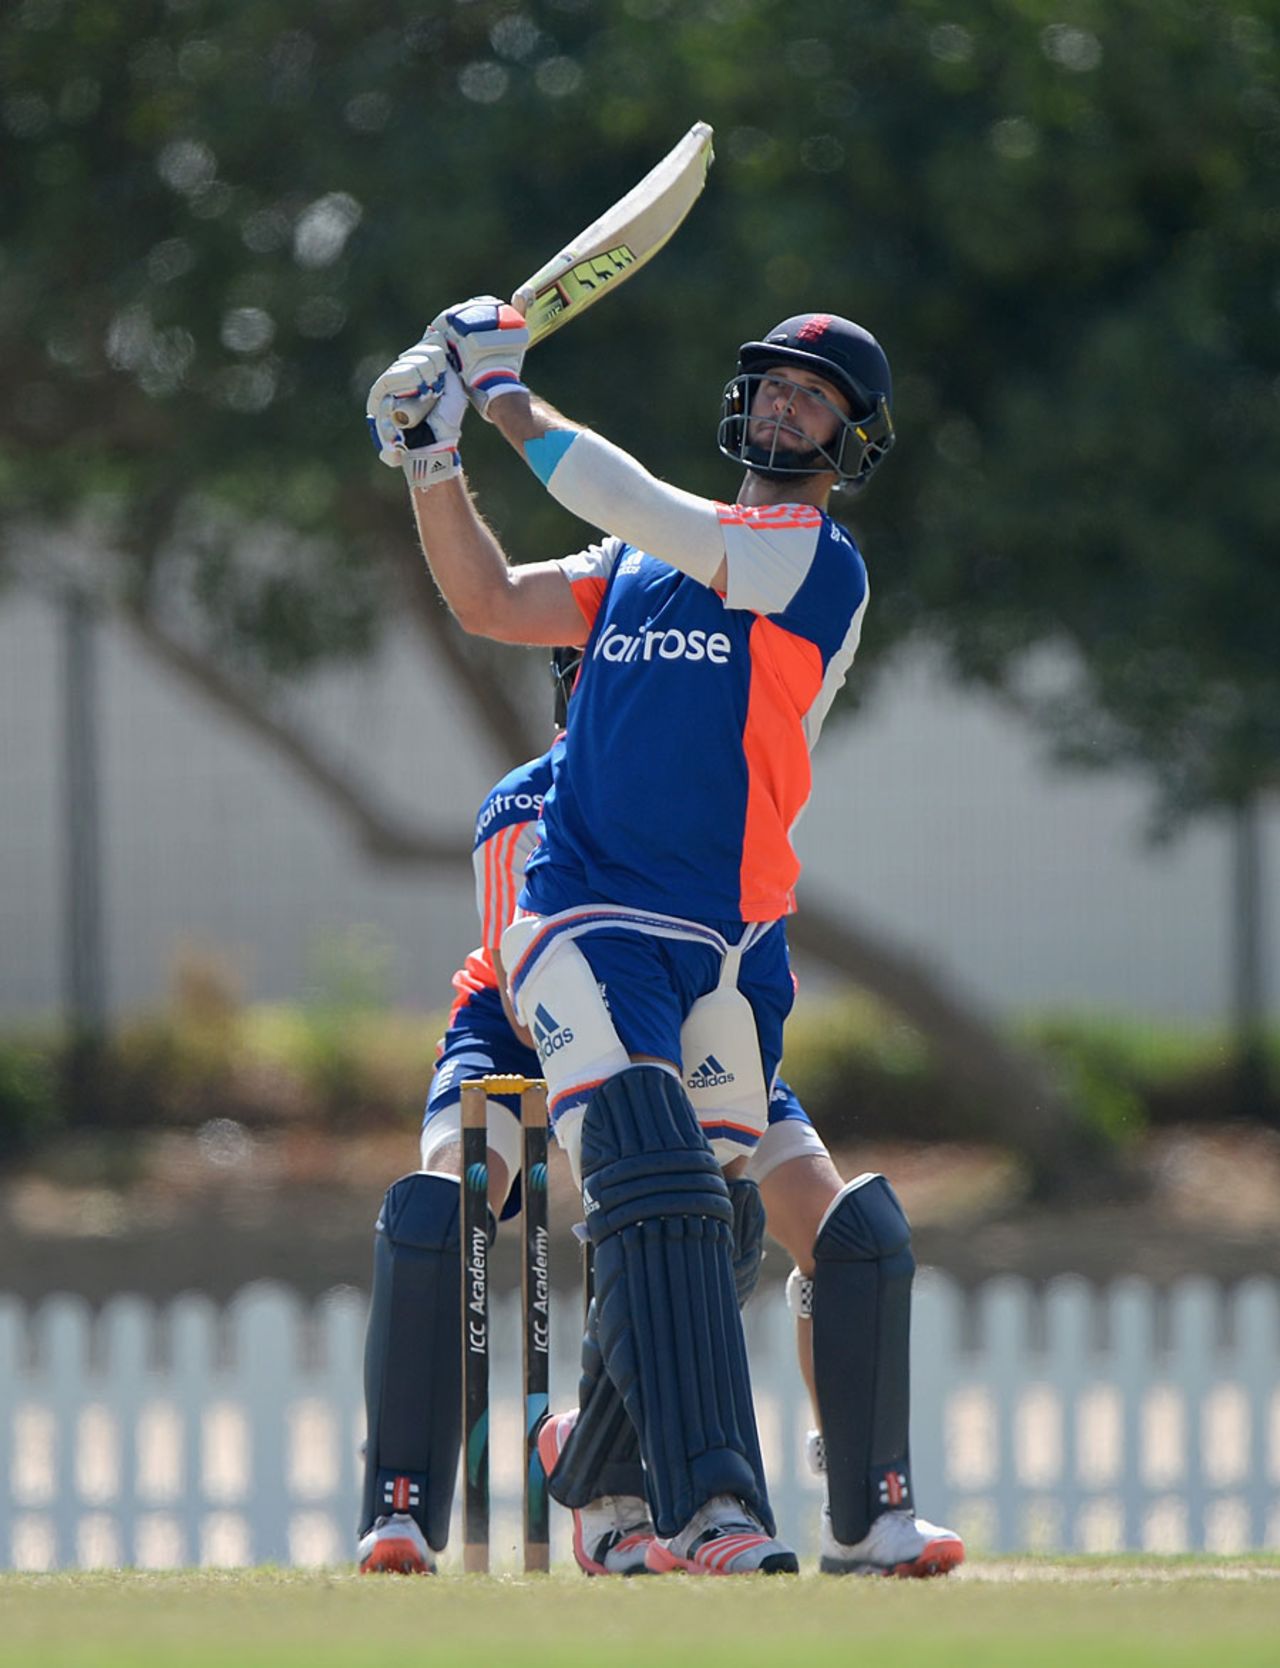 Ross Whiteley clubs one during a session in the middle, Dubai, November 22, 2015